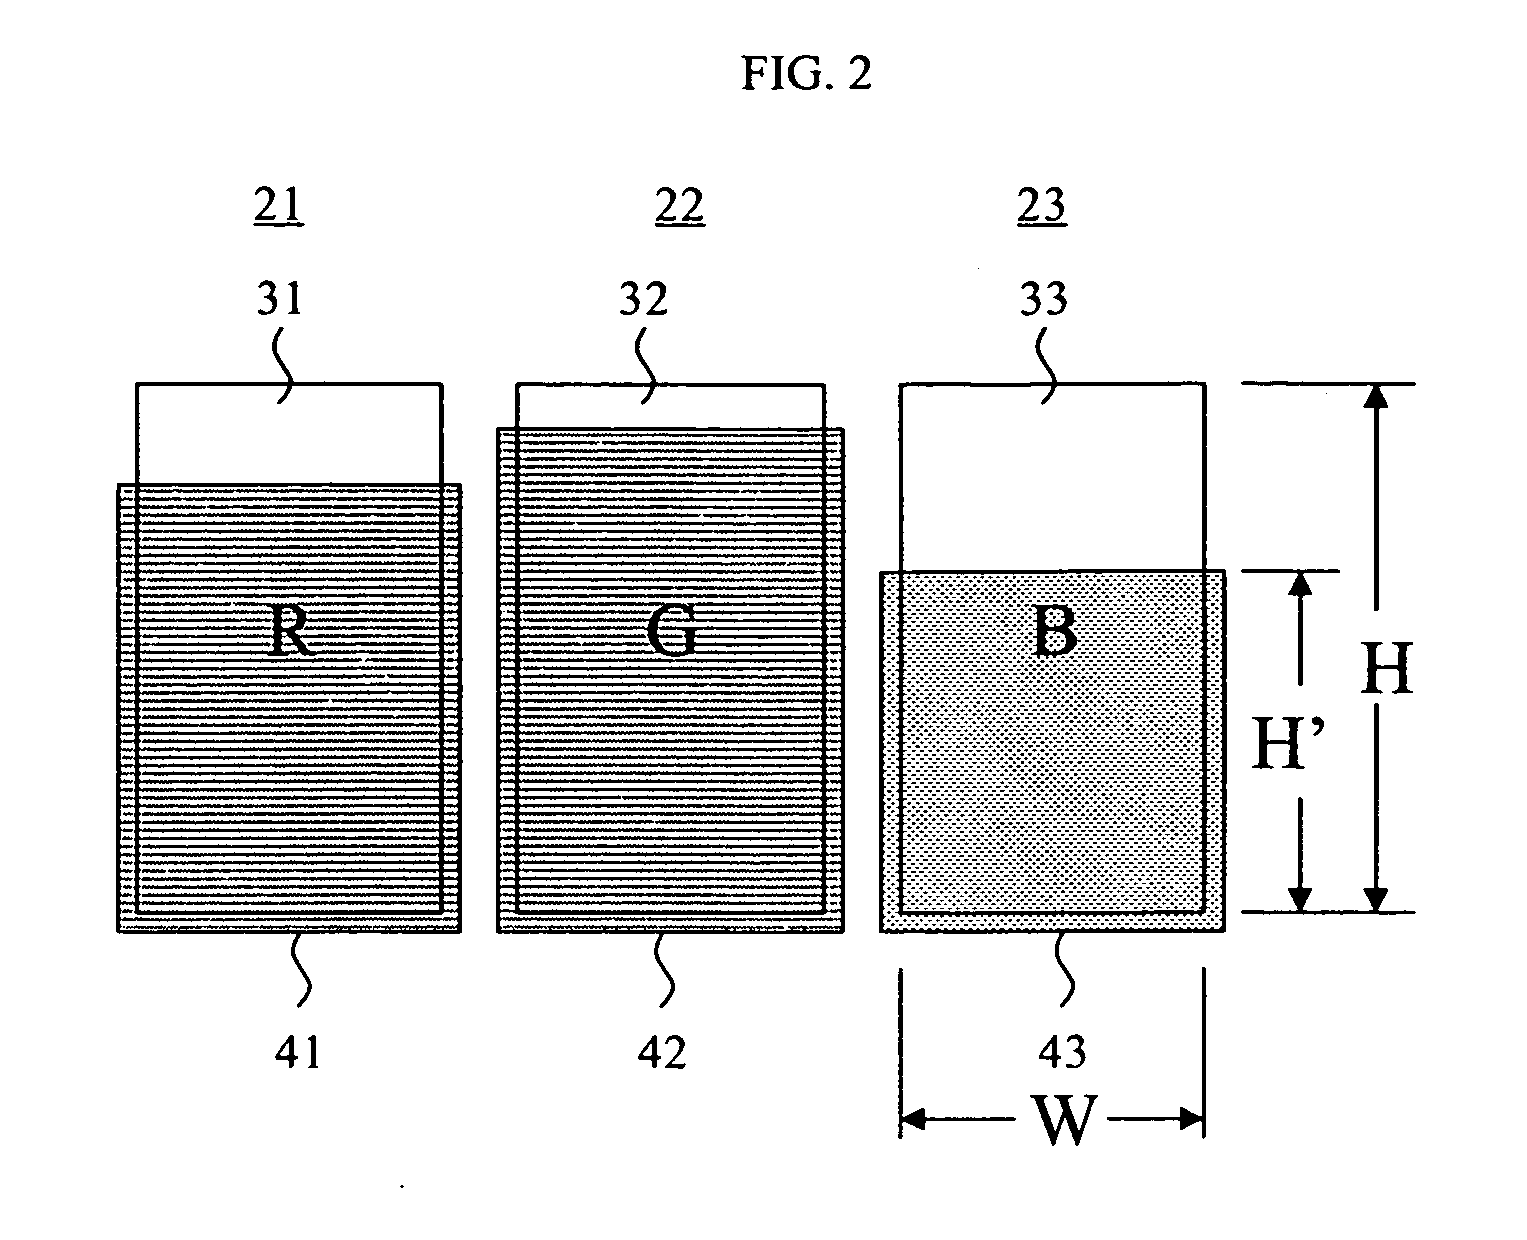 Oled microcavity subpixels and color filter elements